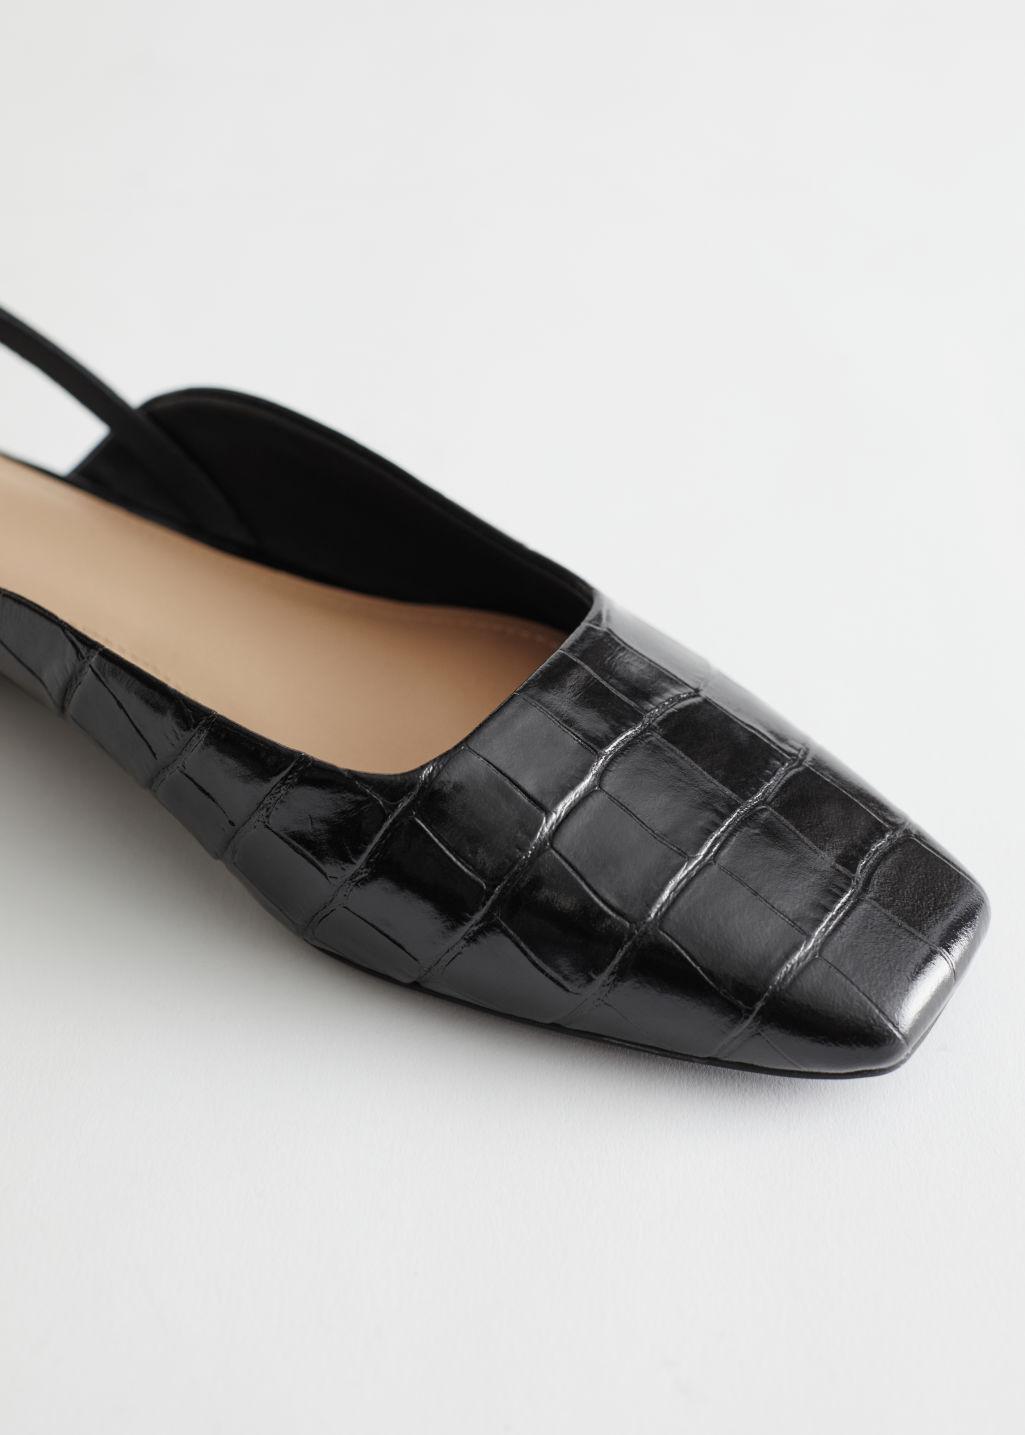 Imperialisme baas bereiken & Other Stories Leather Square Toe Ballerina Flats in Black | Lyst